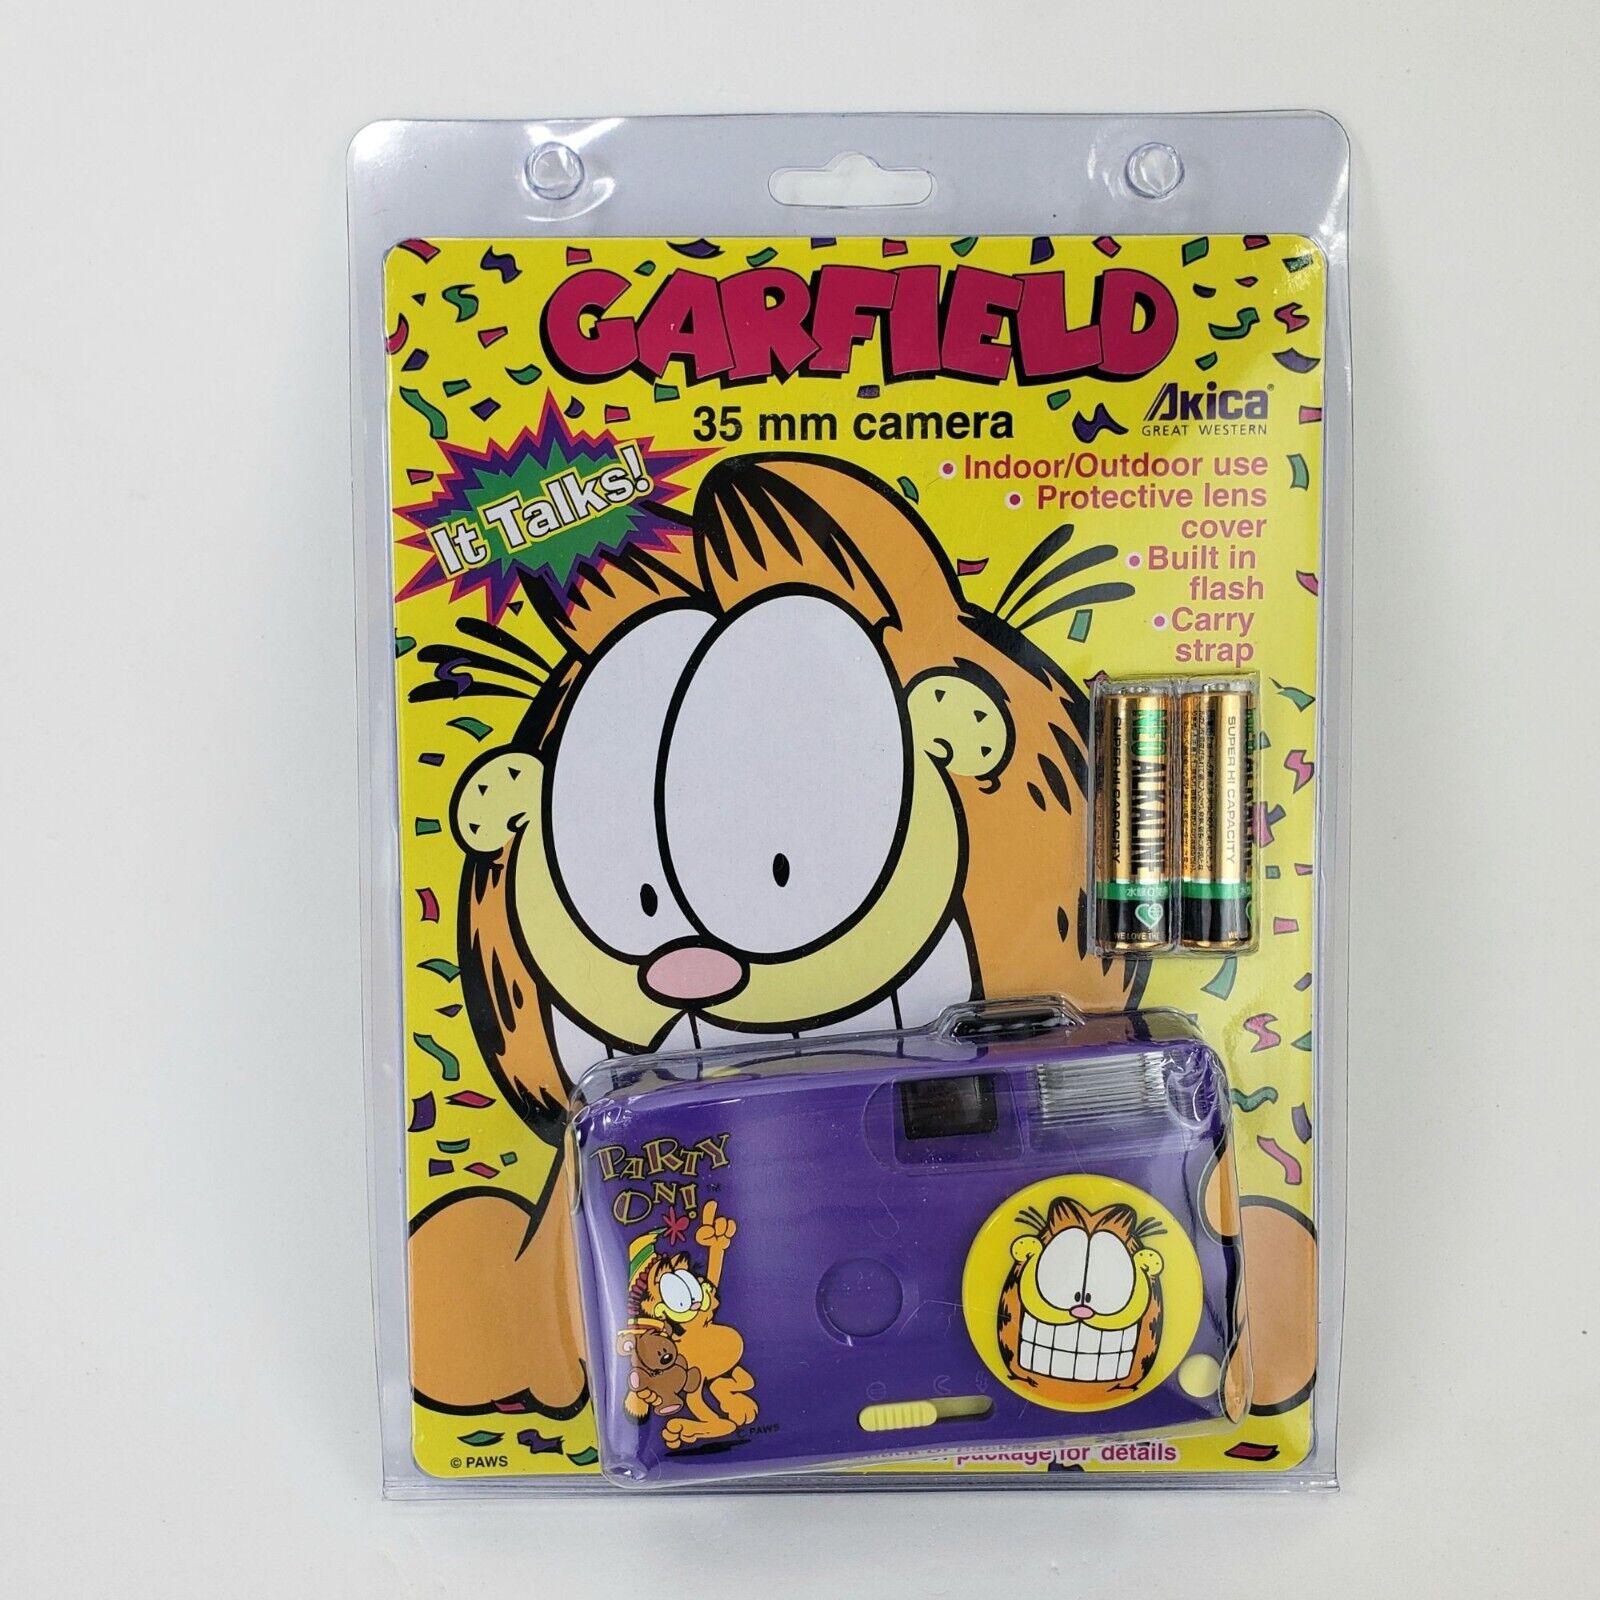 Garfield the Cat Talking 35mm Camera by Akica Paws Celebration Rare Sealed NOS